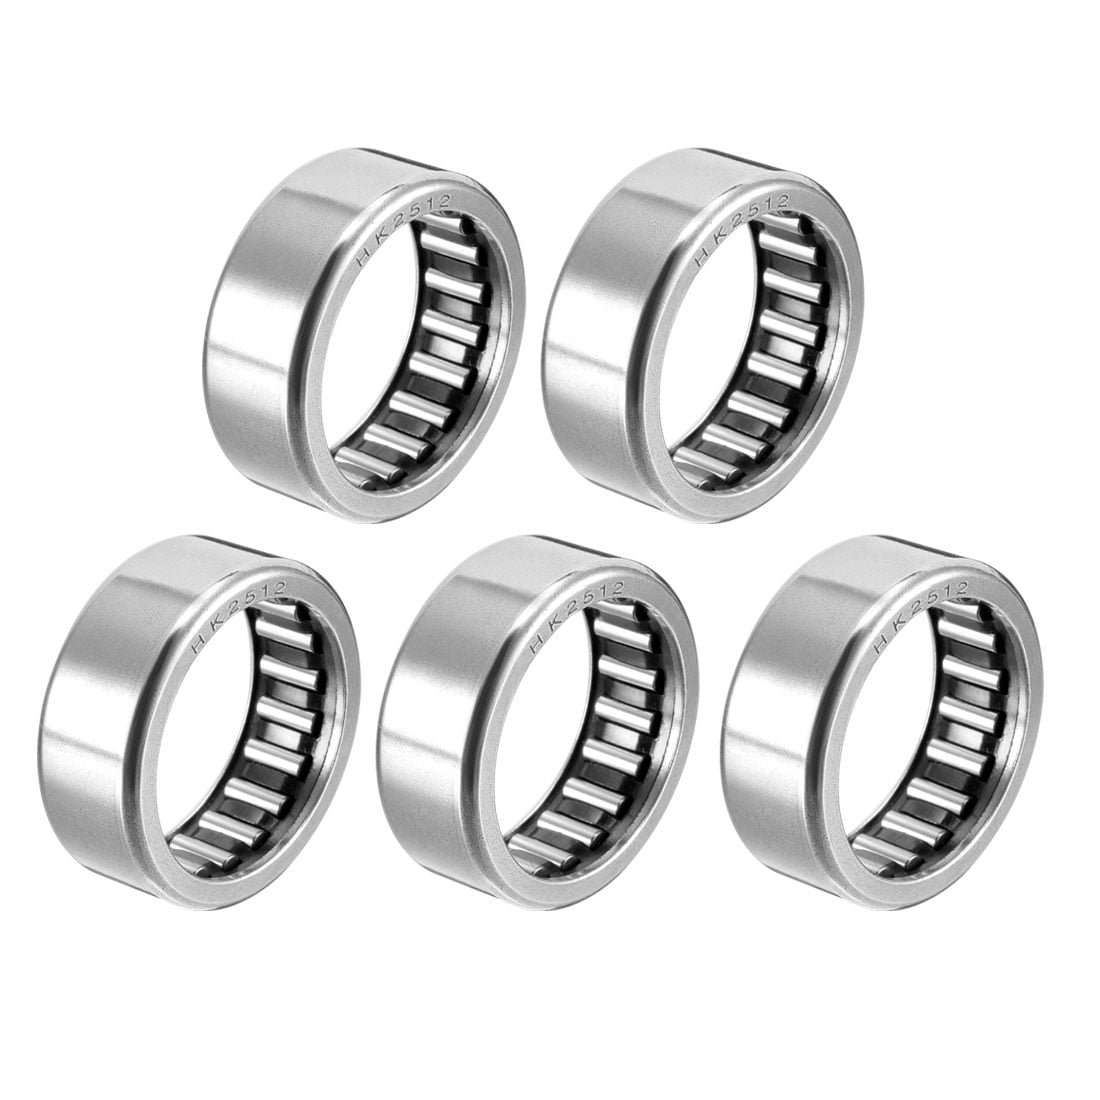 uxcell HK2512 Drawn Cup Needle Roller Bearings Open End 12mm Width Pack of 5 32mm OD 25mm Bore Dia 